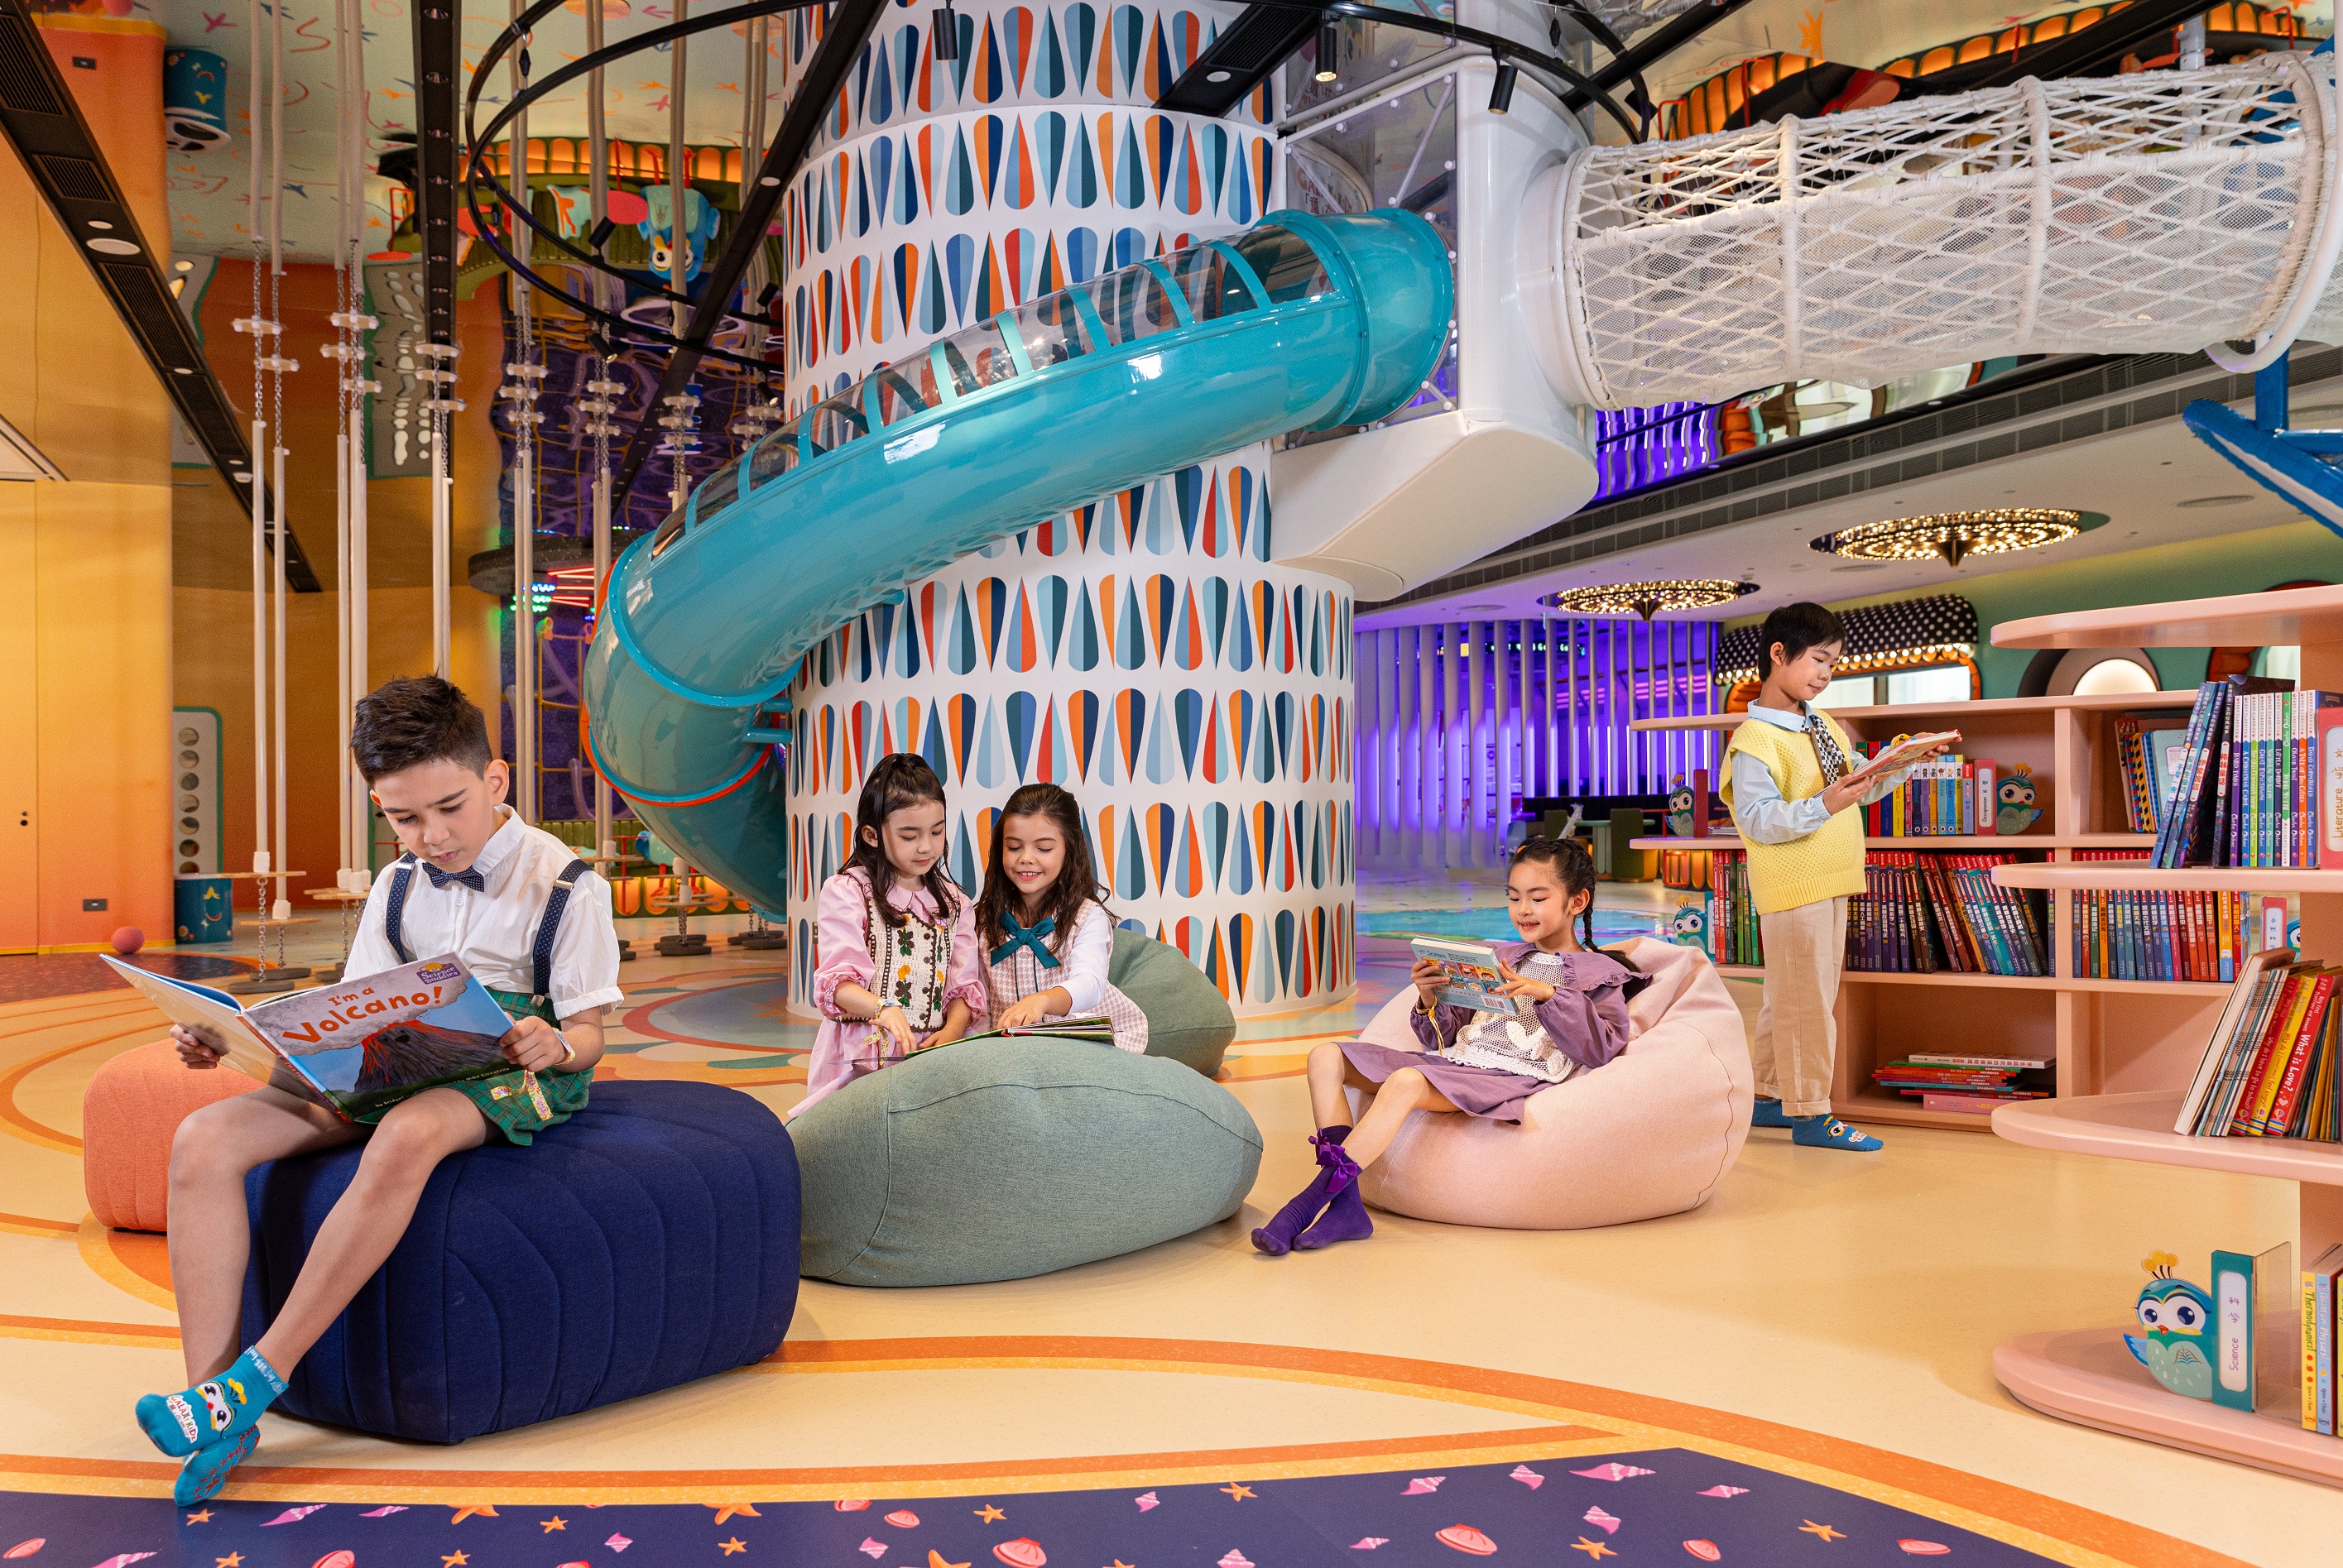 At Galaxy Kidz, young guests are warmly invited to participate in a variety of interactive programs and activities that bring edutainment to life.